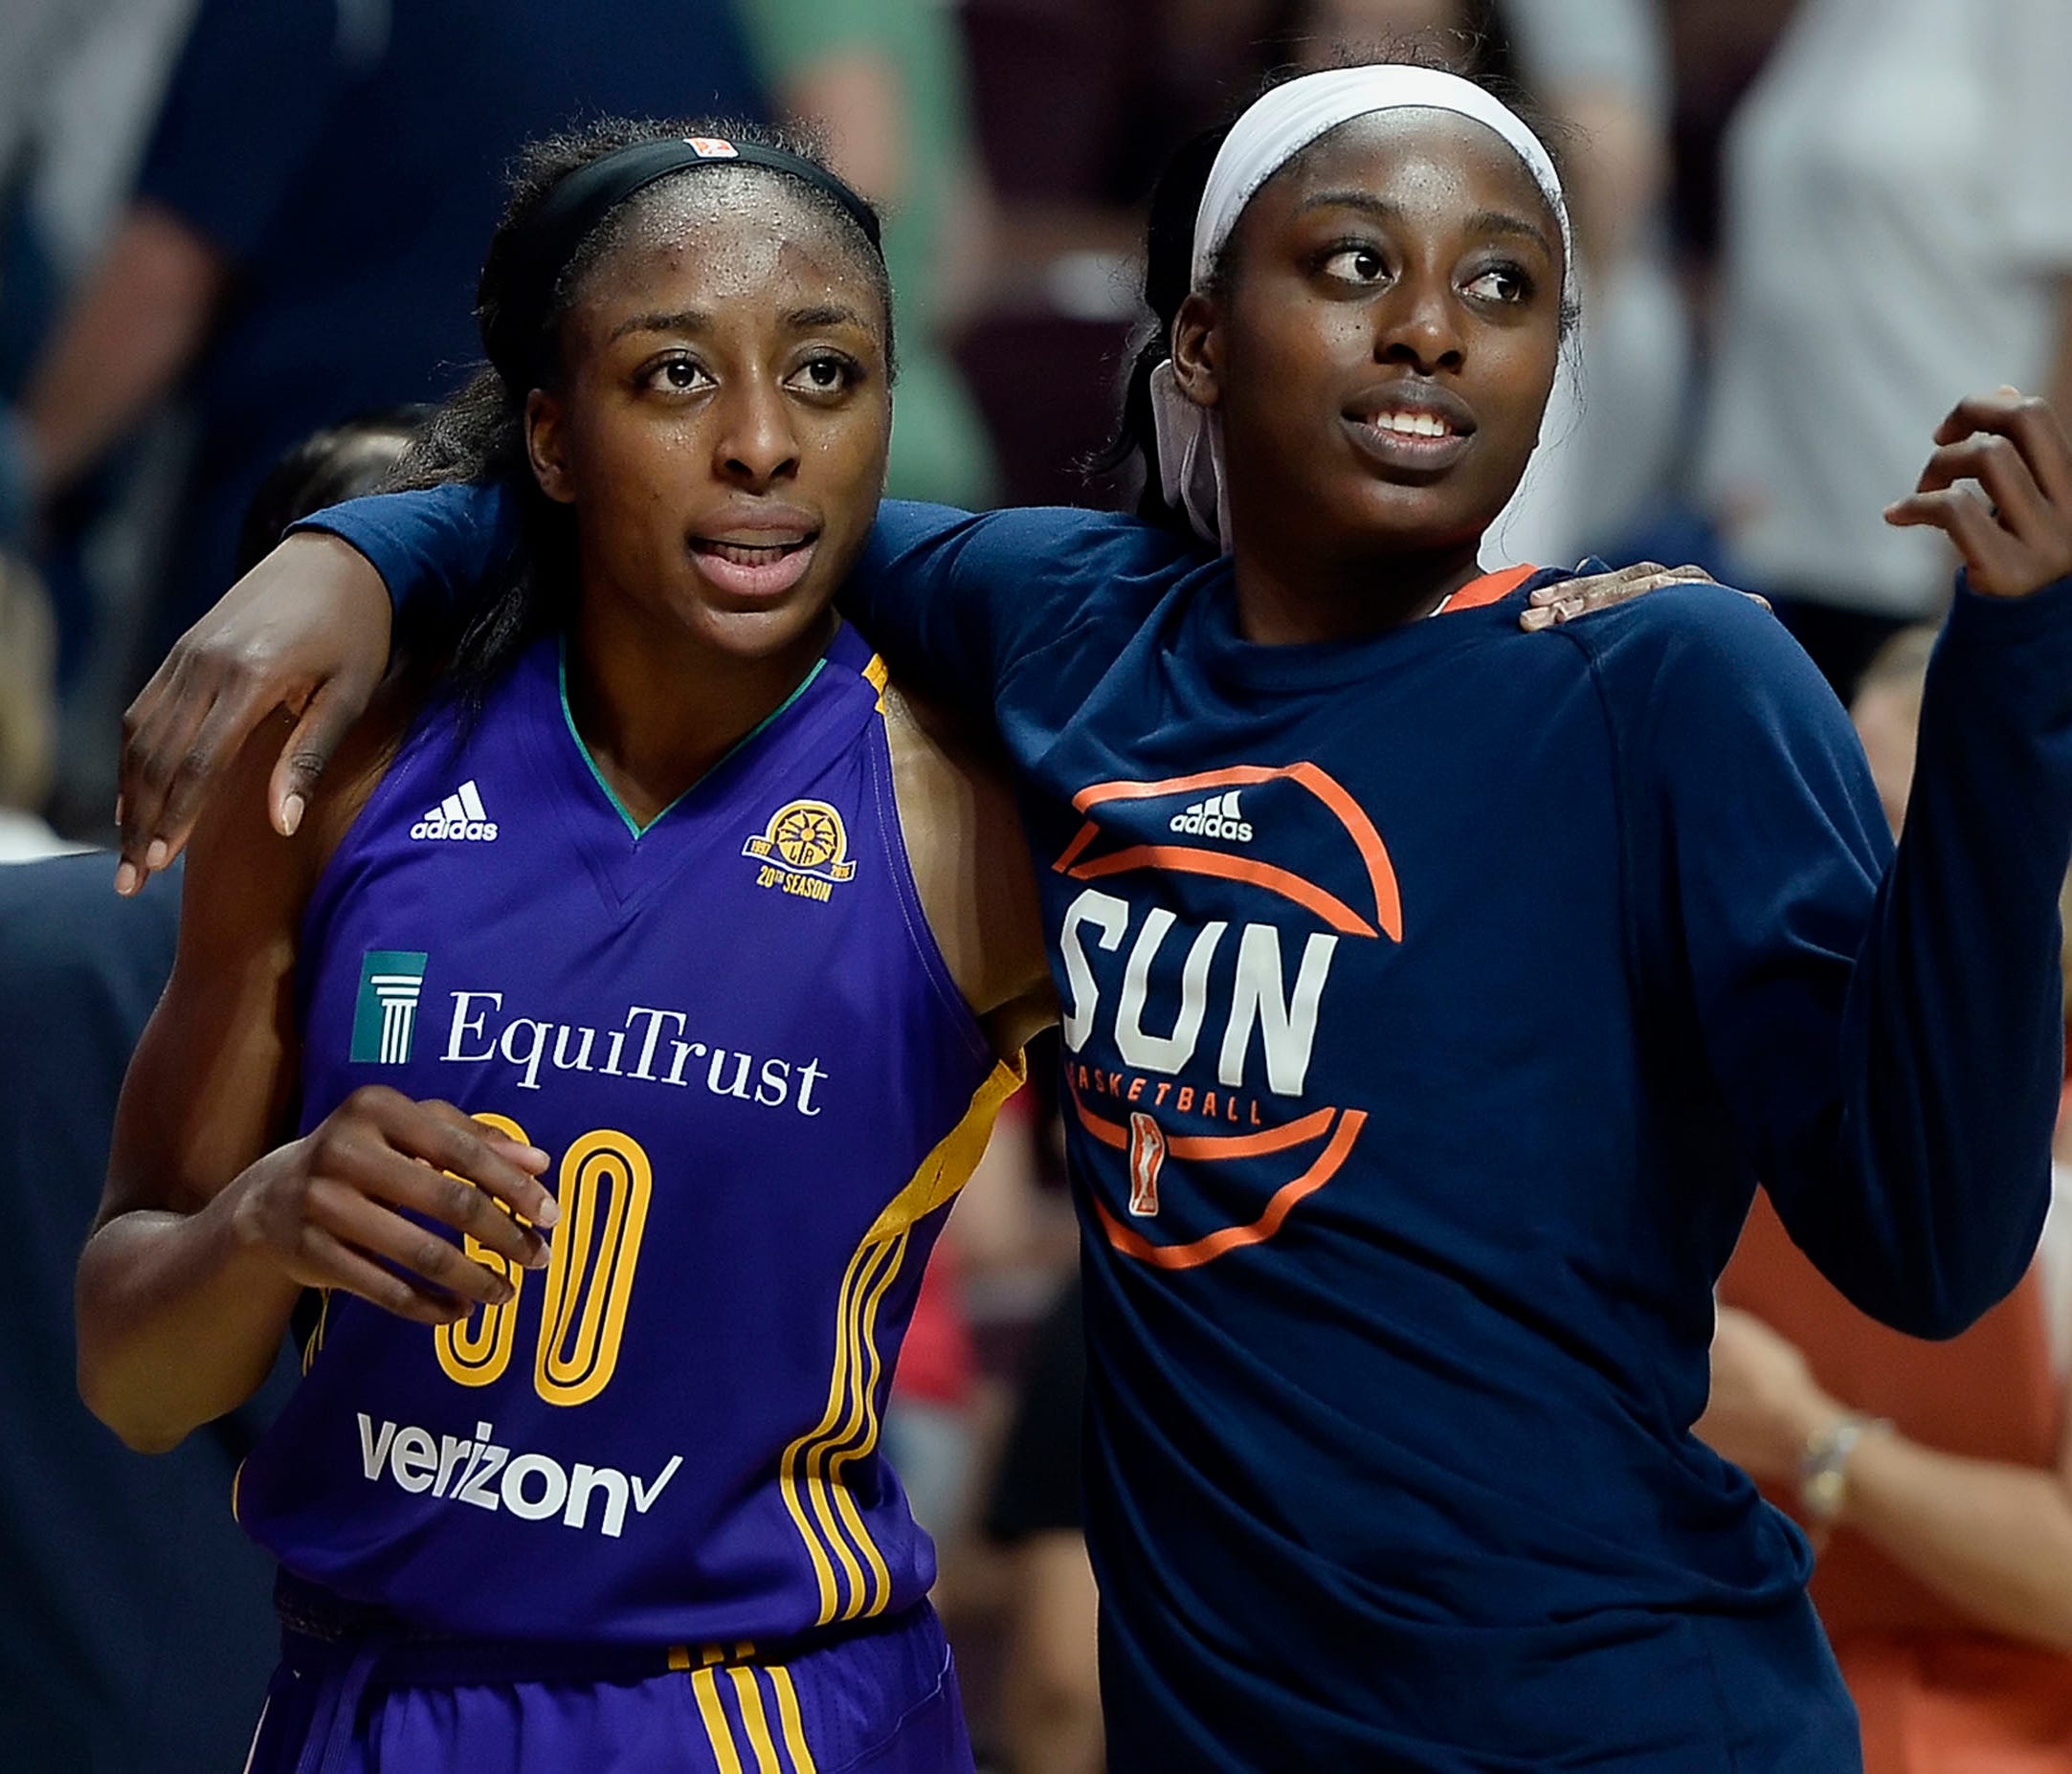 FILE - In this May 26, 2016, file photo, sisters Los Angeles Sparks' Nneka Ogwumike, left, and Connecticut Sun's Chiney Ogwumike, right, walk off the court together at the end of a WNBA basketball game between the their teams, in Uncasville, Conn. Ch